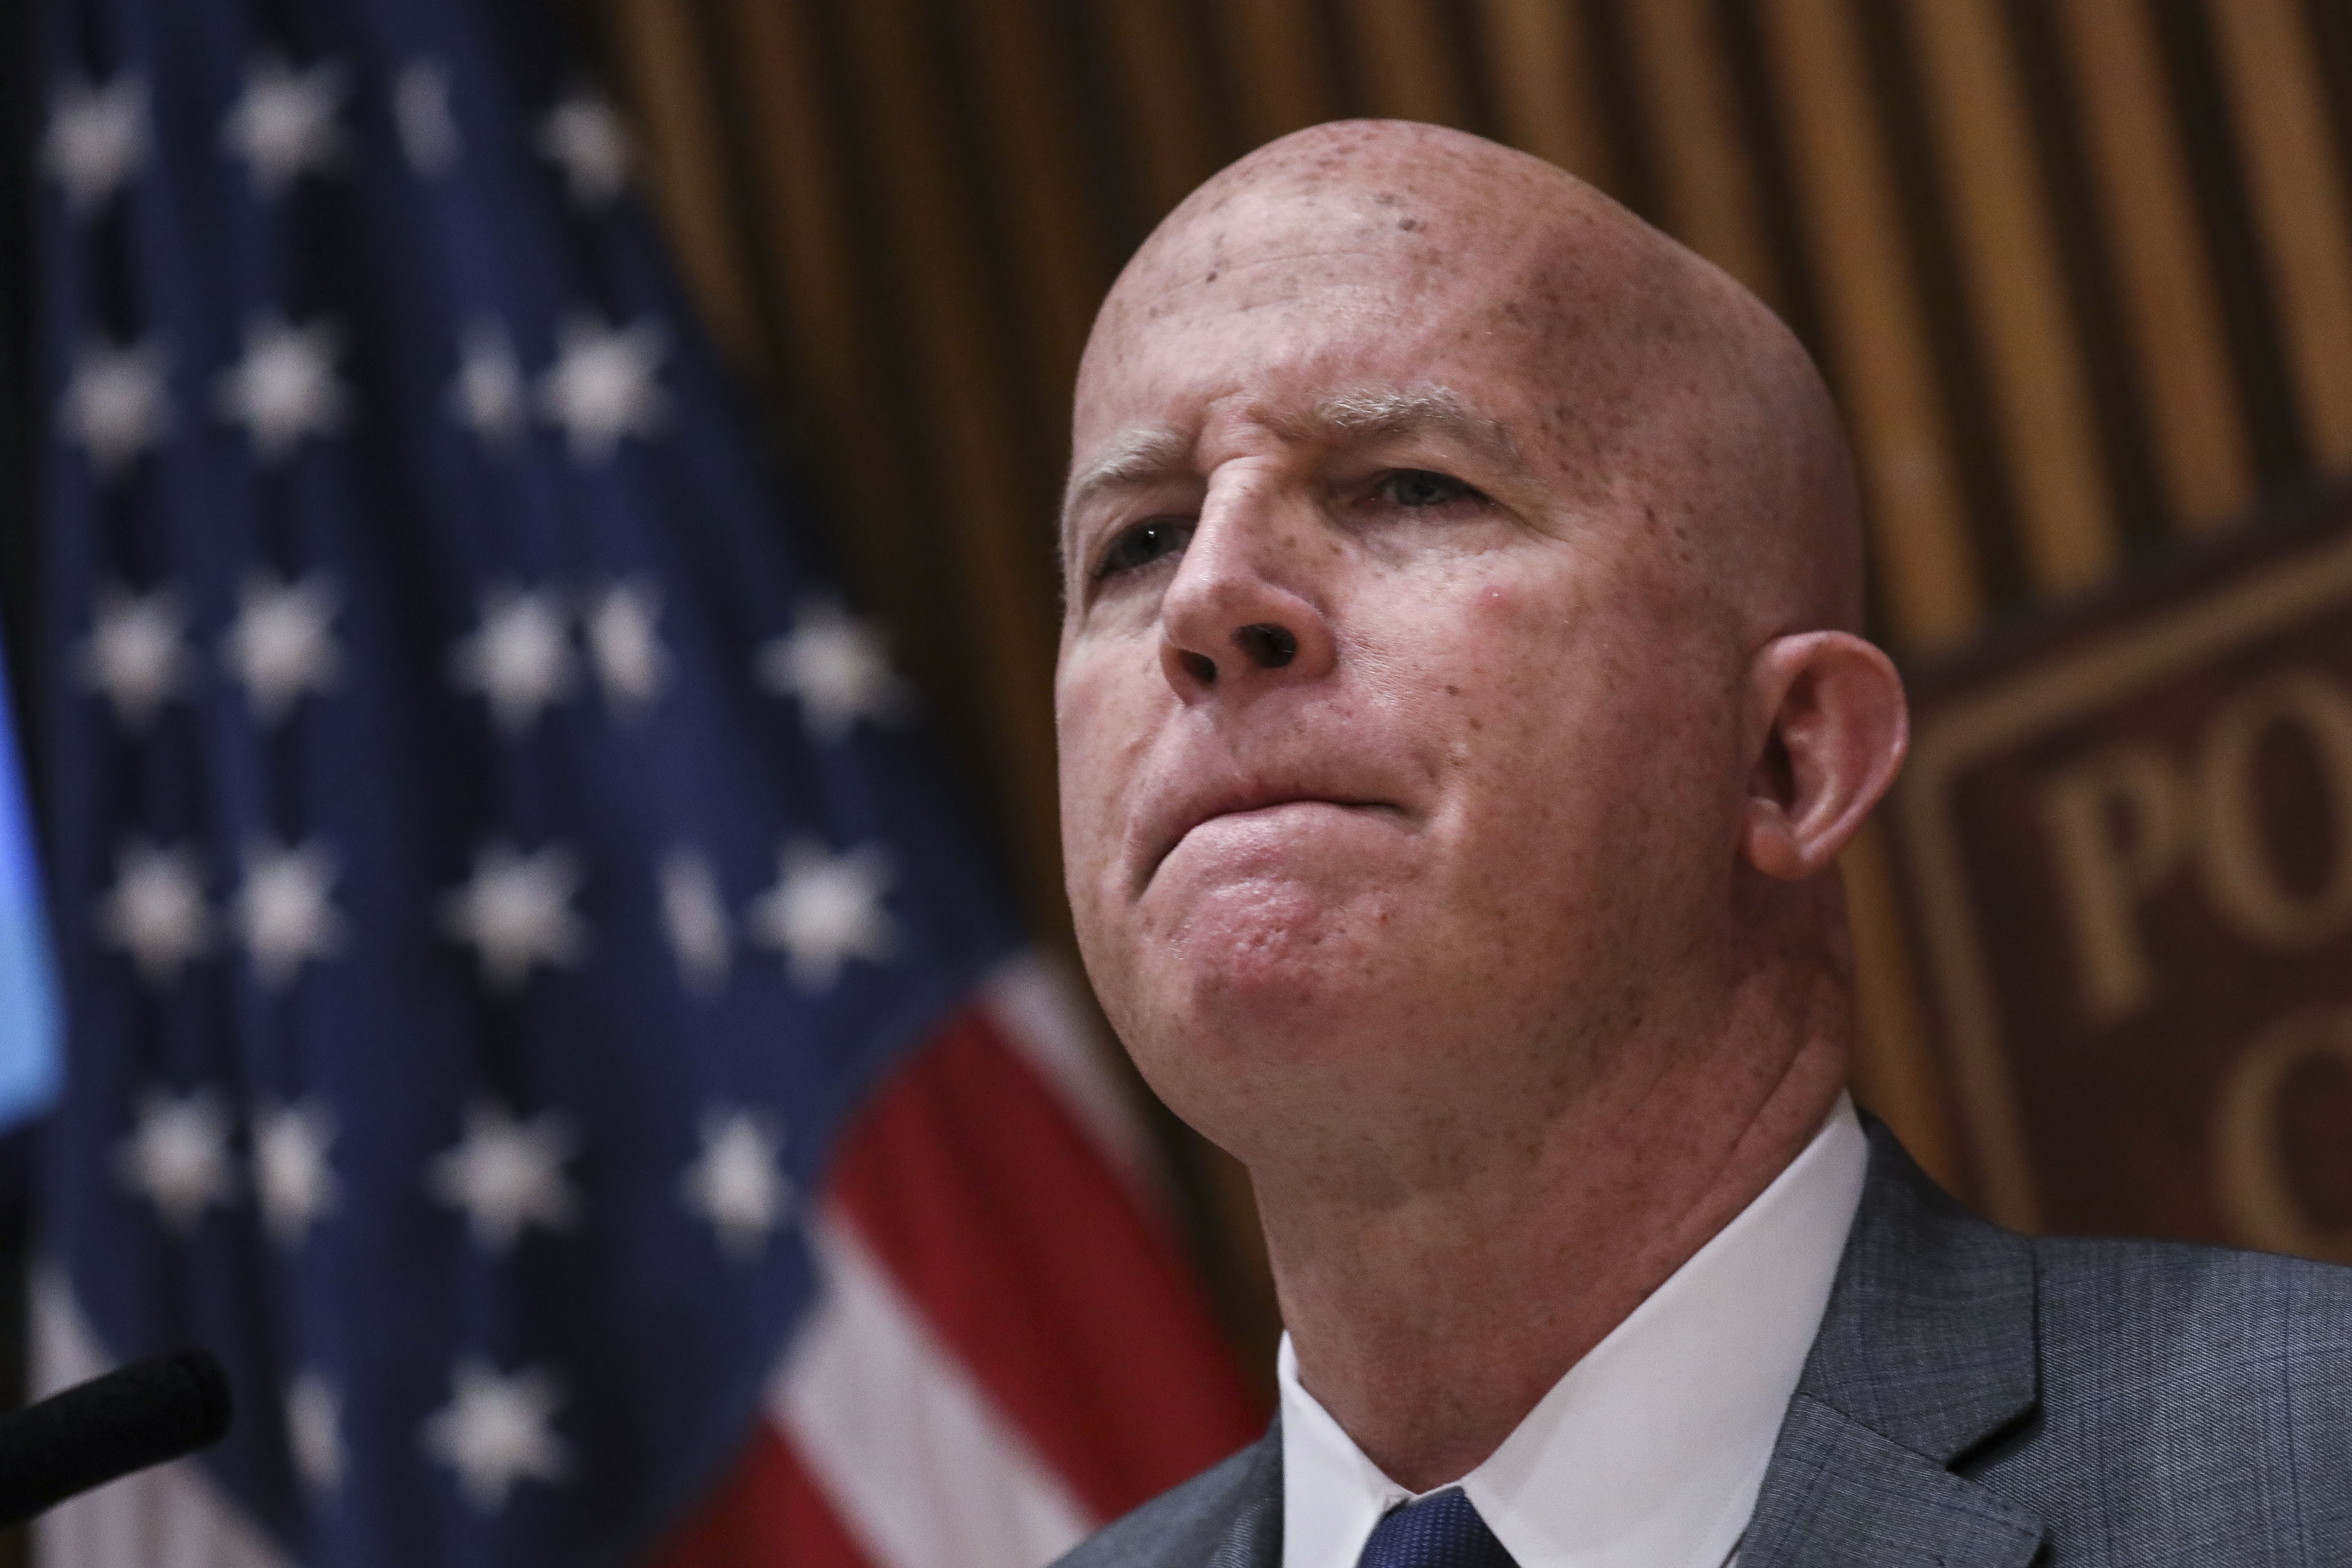 Former New York Police Department Commissioner James O'Neill in New York City on August 19, 2019.